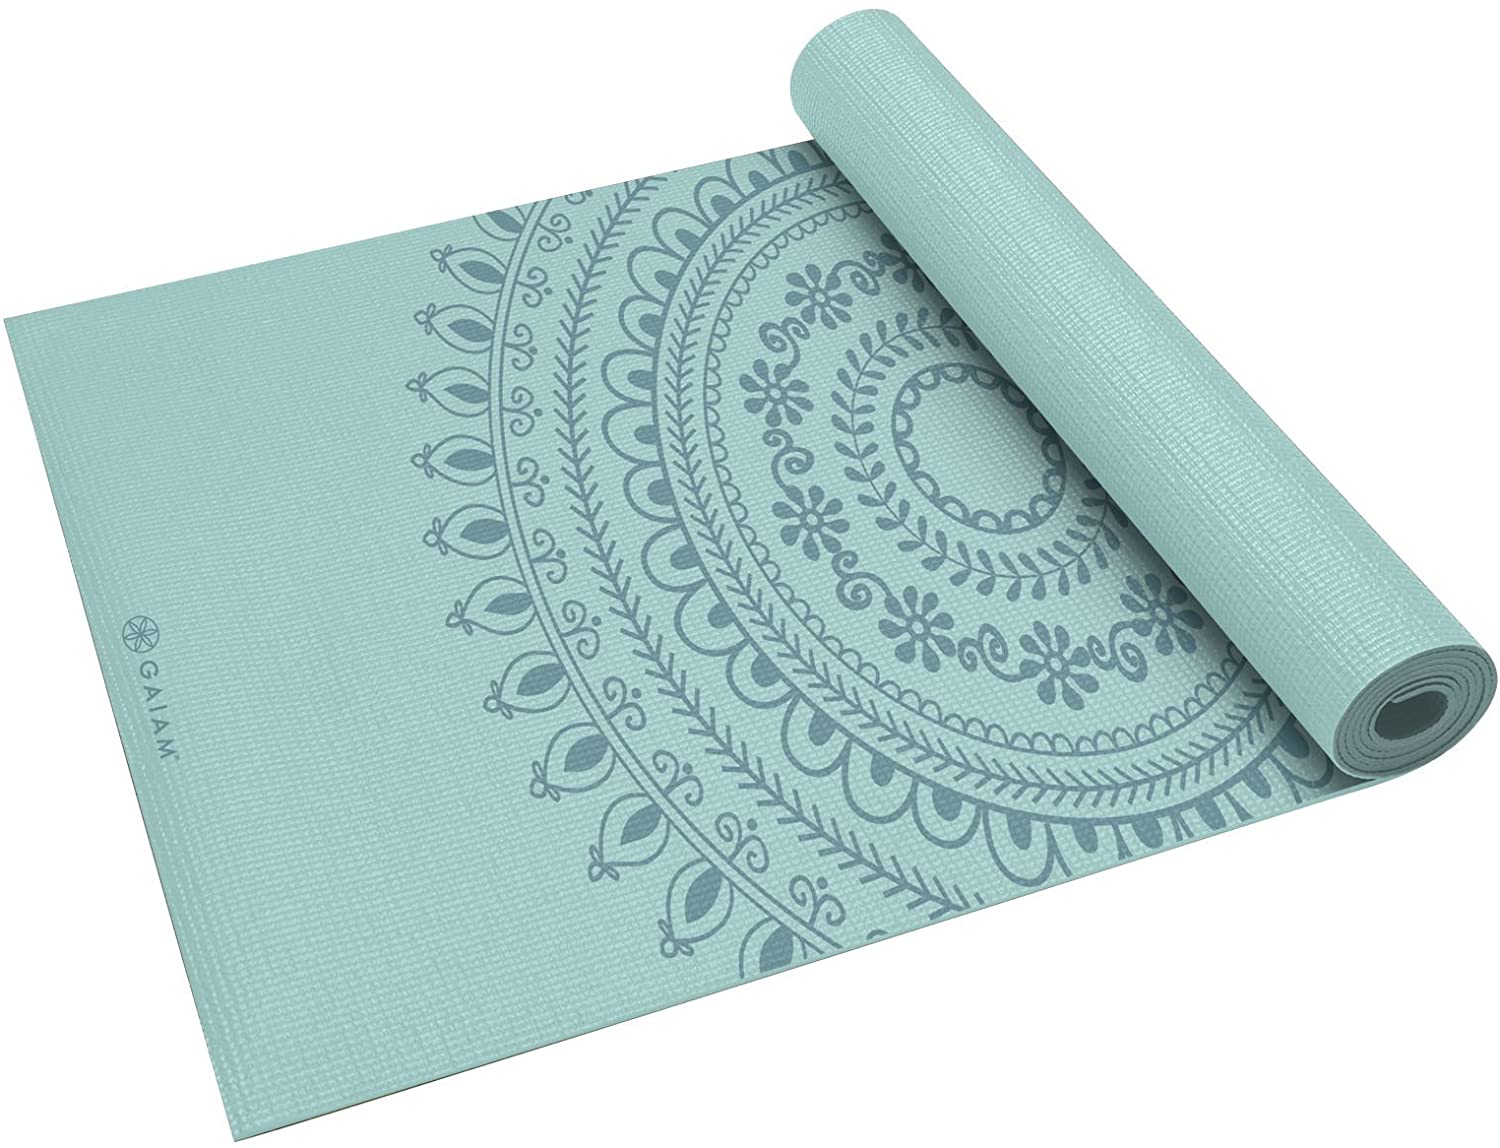 Gaiam Yoga Mat - 6mm Insta-Grip Extra Thick & Dense Textured Non Slip  Exercise Mat for All Types of Yoga & Floor Workouts, 68 L x 24 W x 6mm  Thick, Sunset